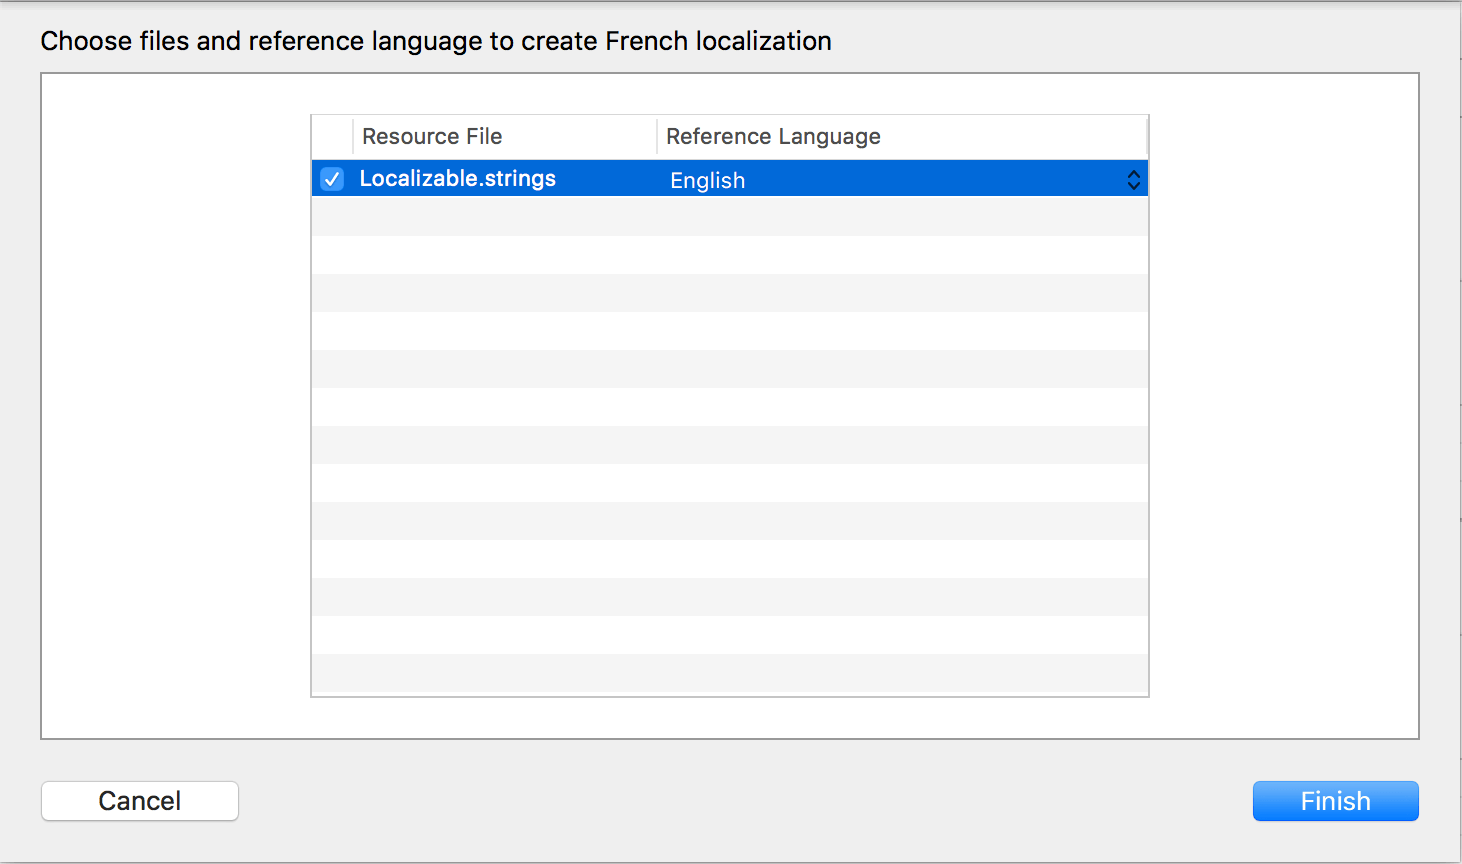 Select the files for the new localization